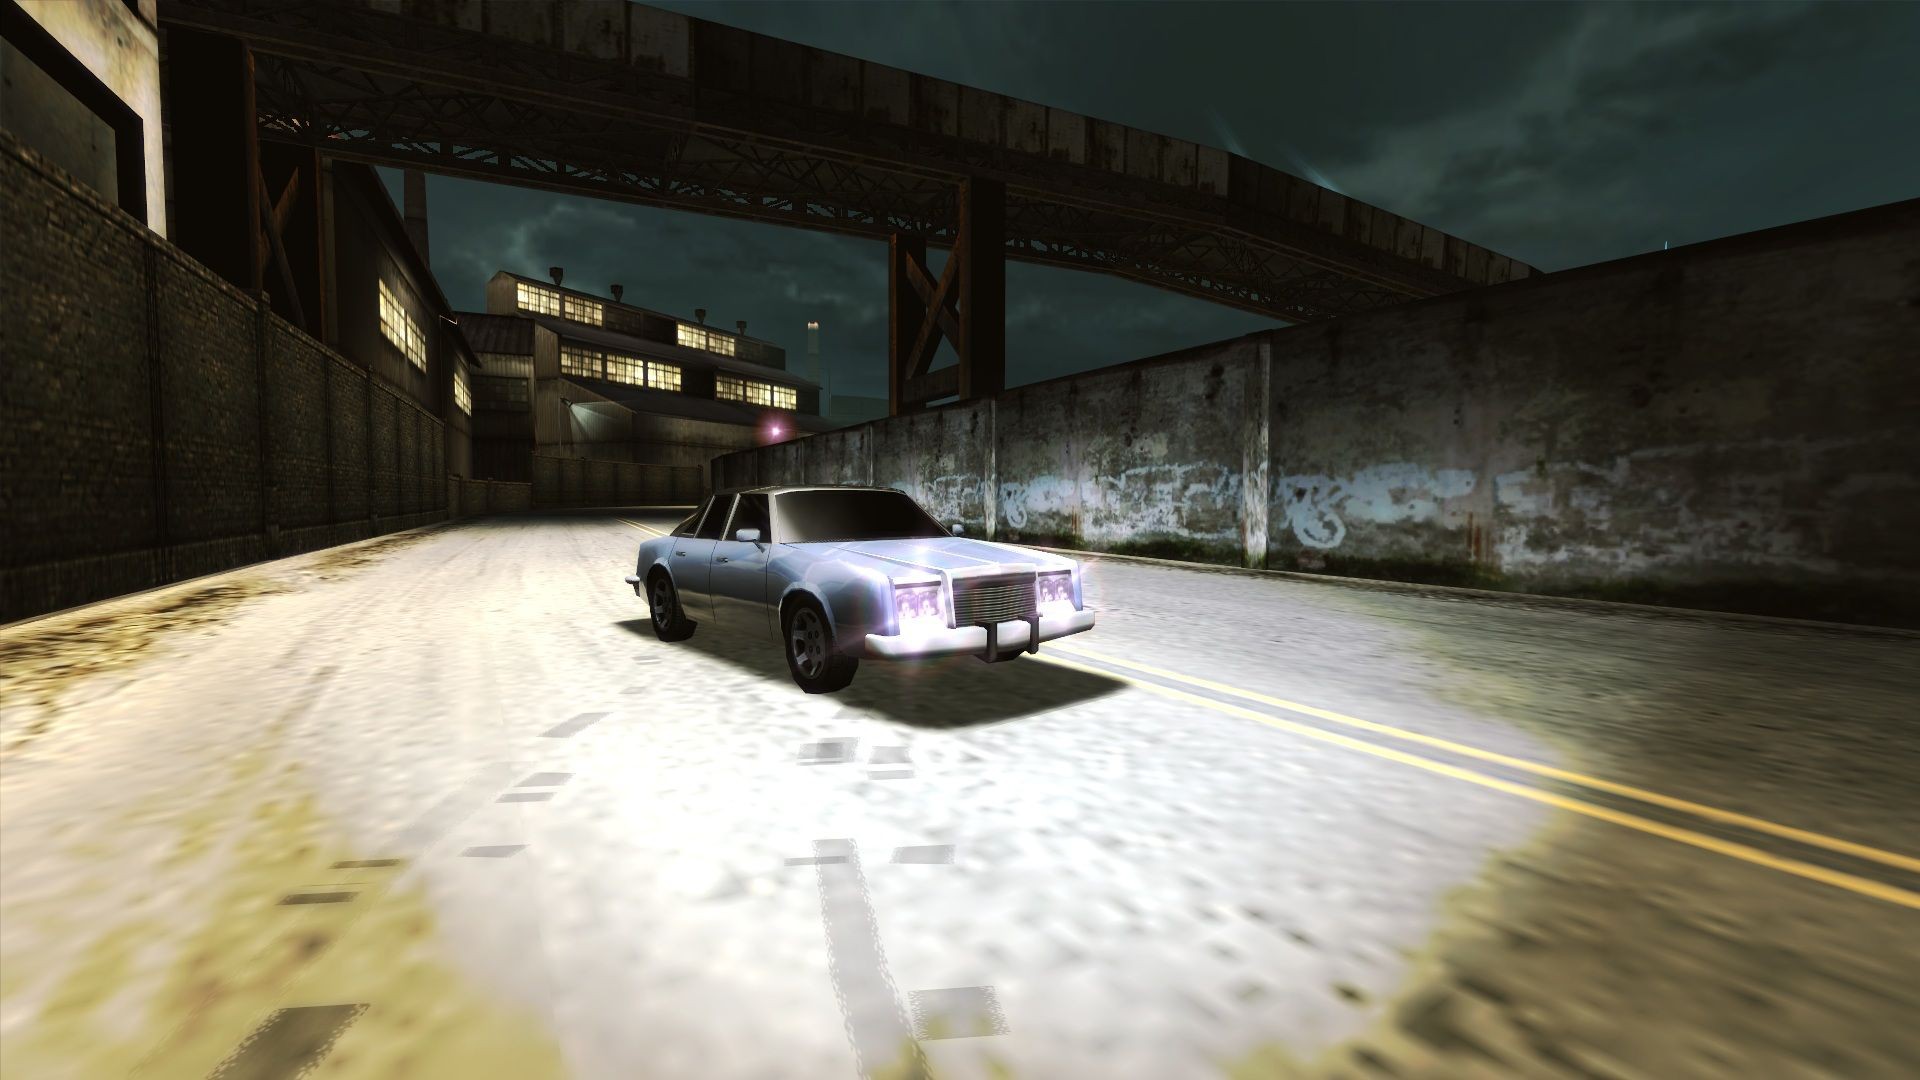 Nfs mods cars. NFS Underground most wanted 2. Car Pack для NFS most wanted 2005. NFS Underground 2 ВАЗ 2105. Мицубиси Eclipse NFS most wanted.